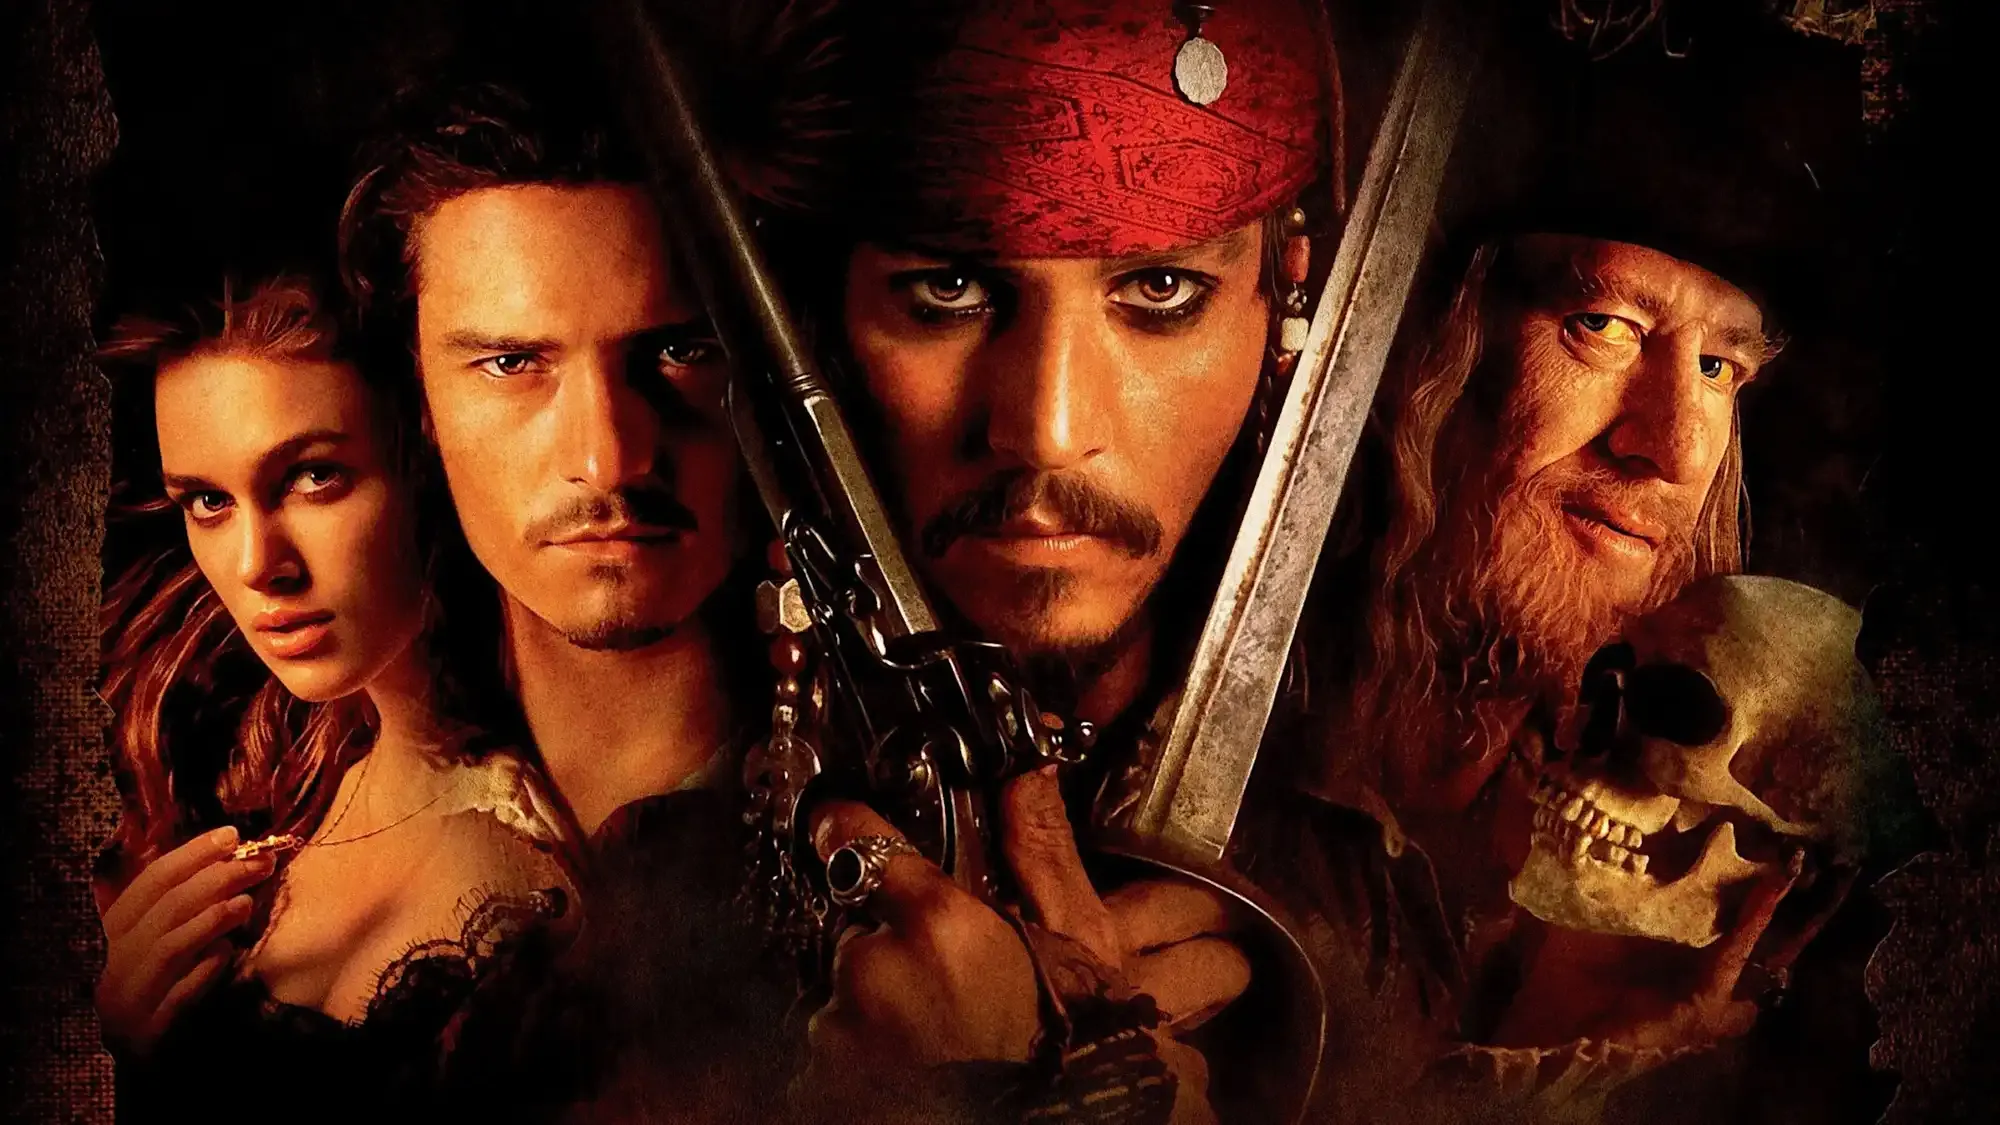 Pirates of the Caribbean: The Curse of the Black Pearl movie review